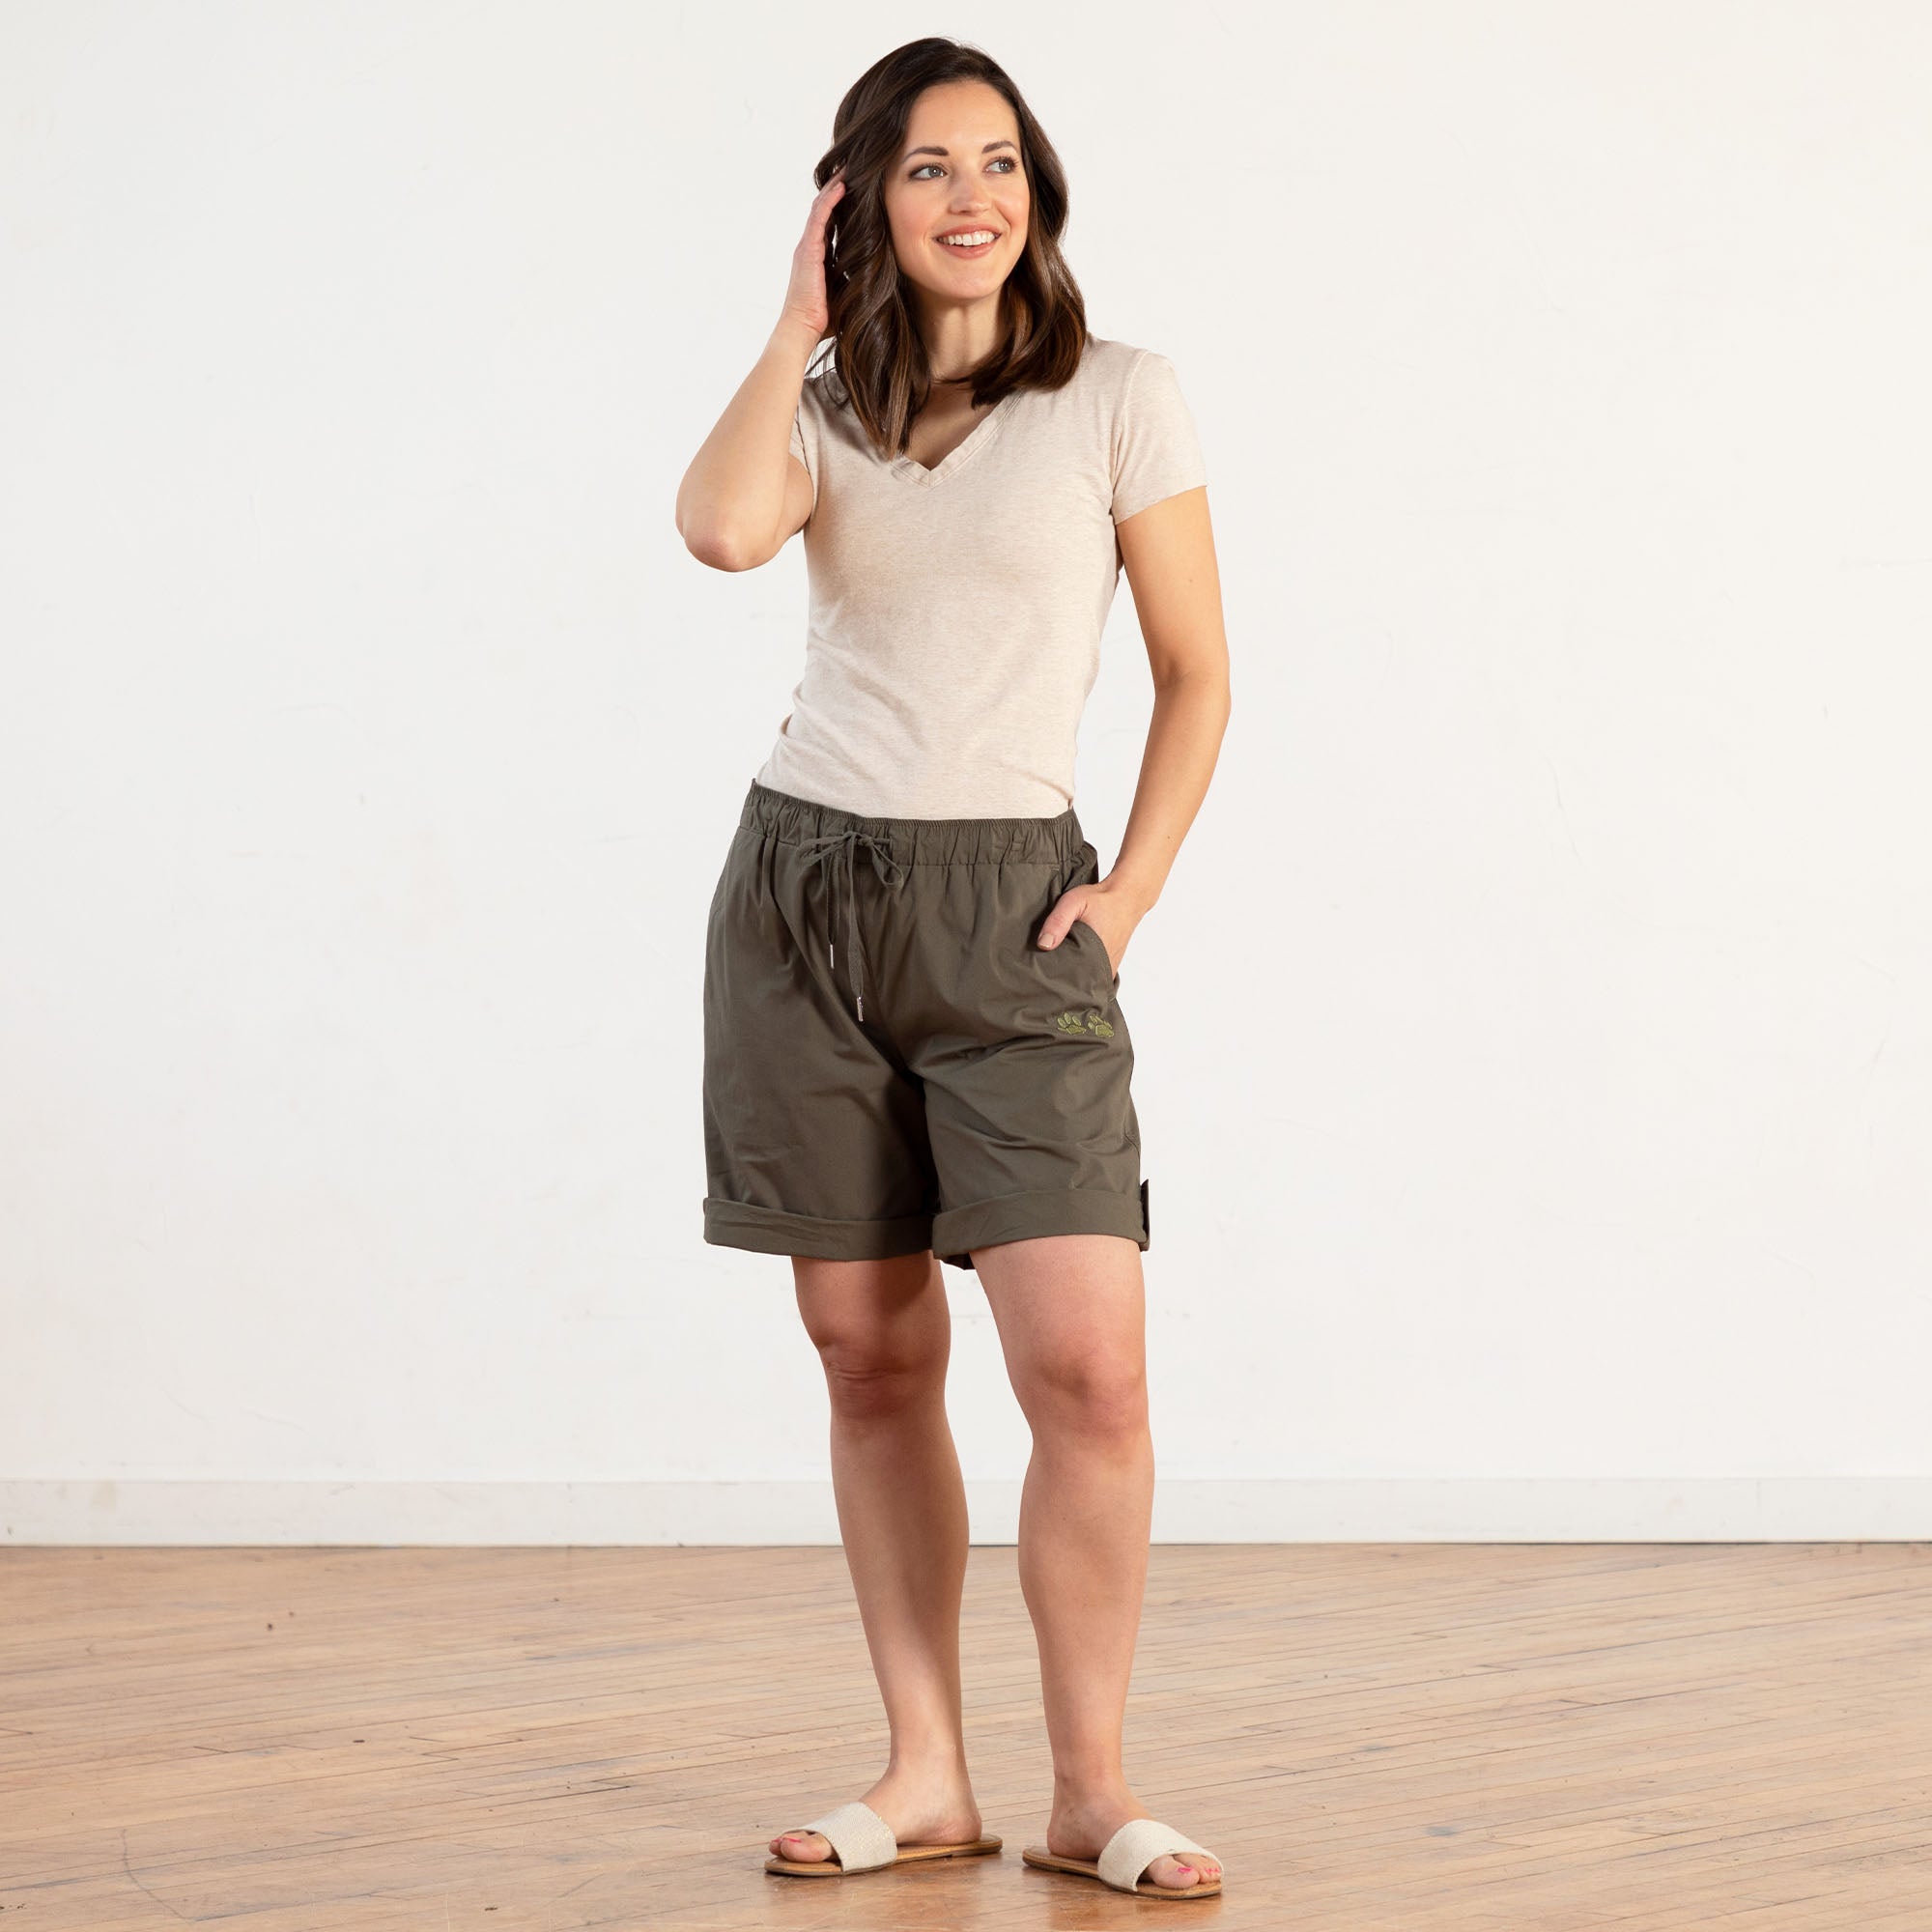 Paw Print Convertible Cuffed Shorts - Olive - 4X